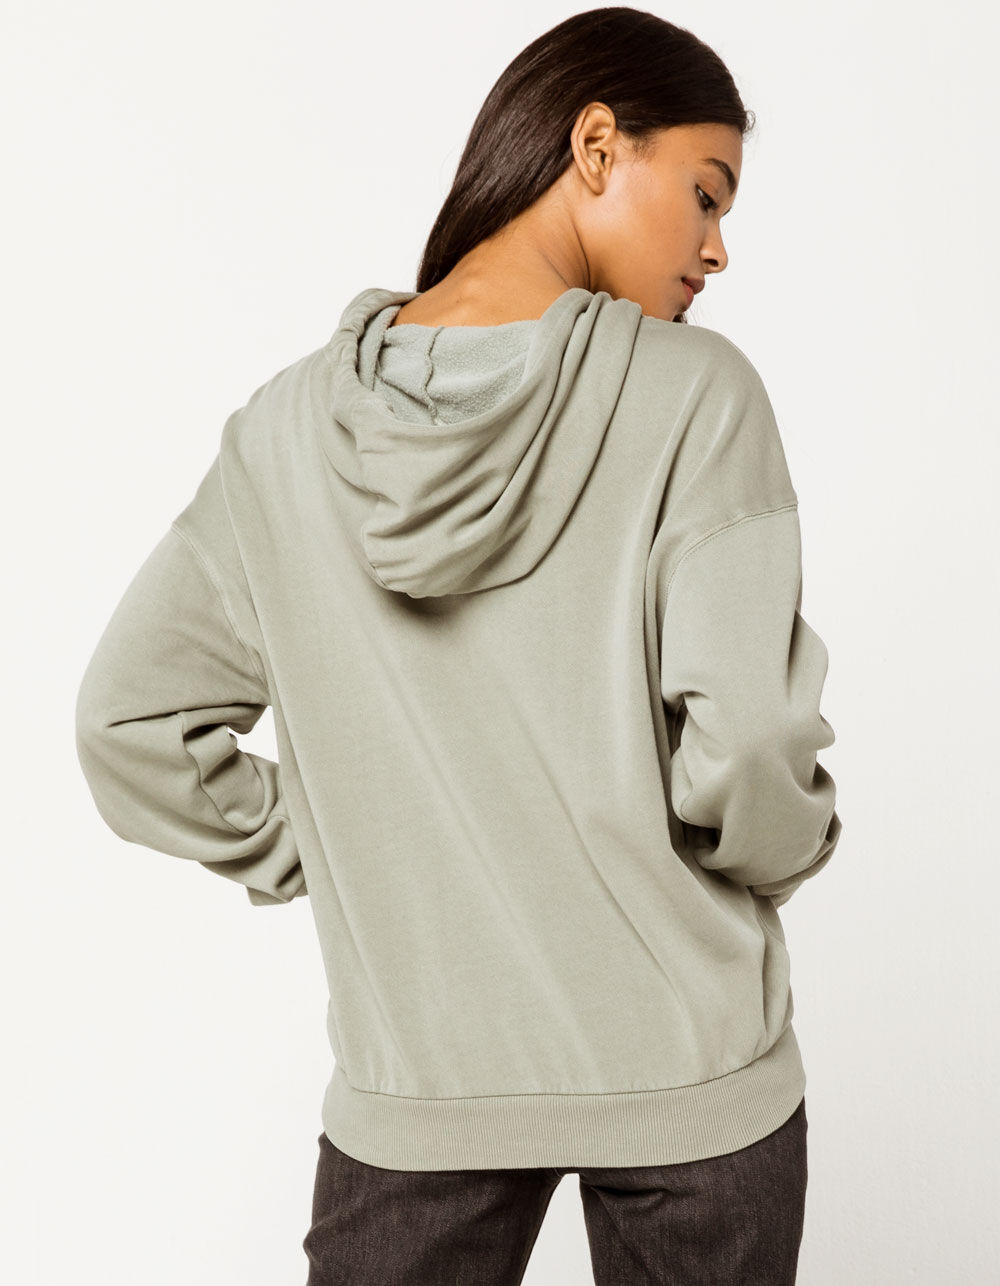 O'NEILL Pismo Womens Hoodie - SAGE | Tillys